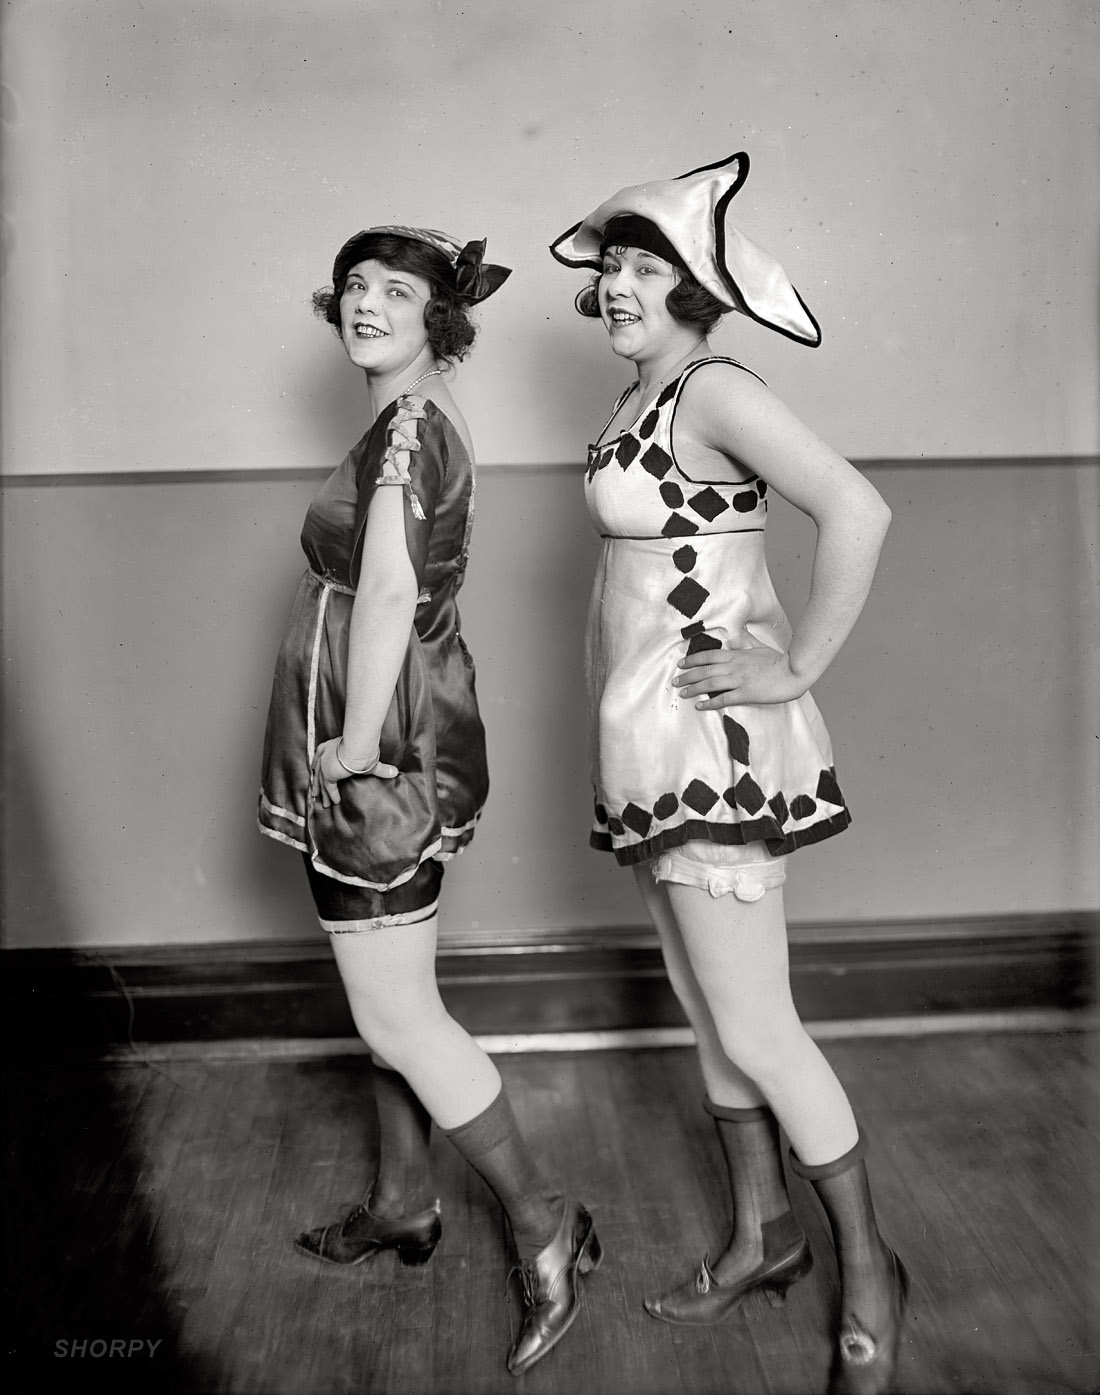 "Sidney Lust girls." Circa 1919, two of Washington, D.C., movie theater owner Sidney Lust's chorus girls, seen earlier out of costume. National Photo Company Collection glass negative, Library of Congress. View full size.